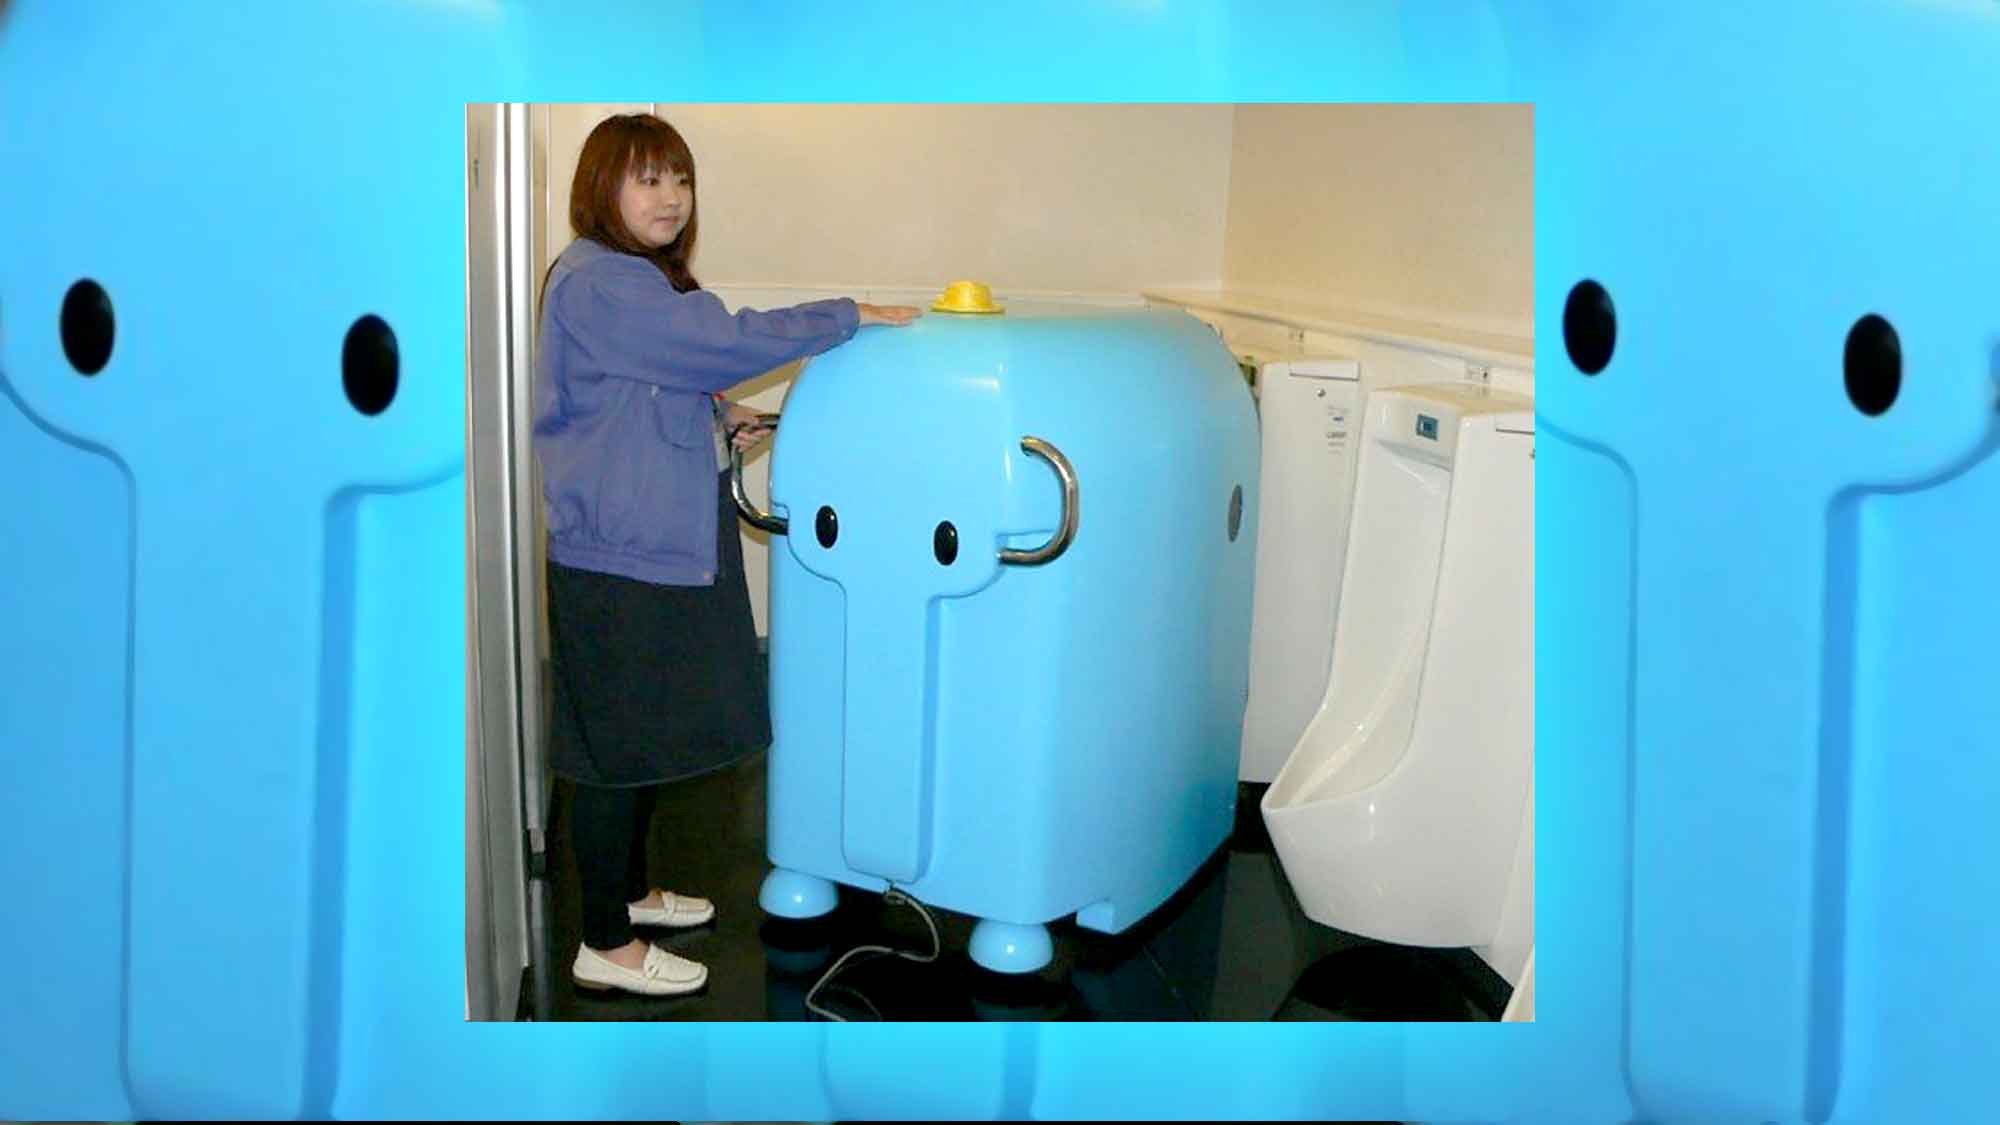 The Dasubee Urinal Cleaning Robot Is Helping Clean Japanese Men's Rooms